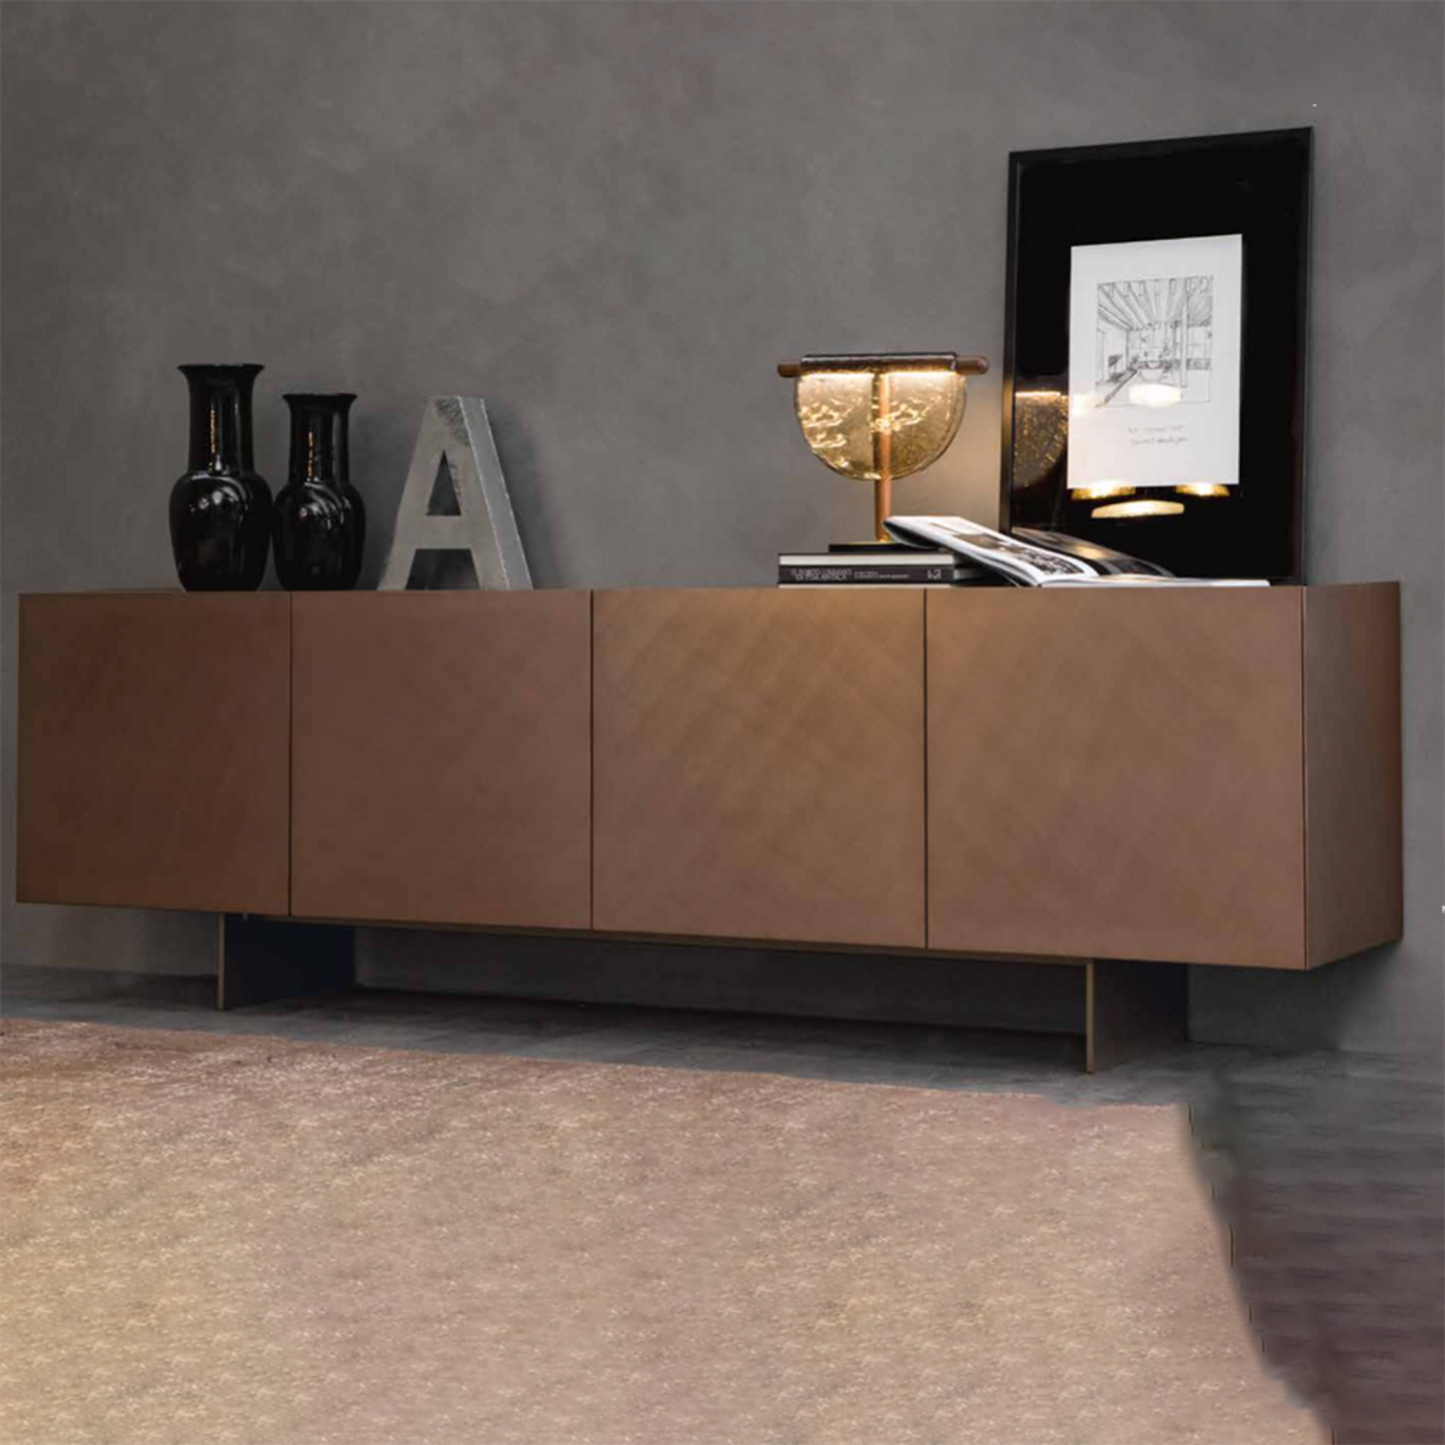 Coated Bronze or Copper Sideboards by Tonin Casa